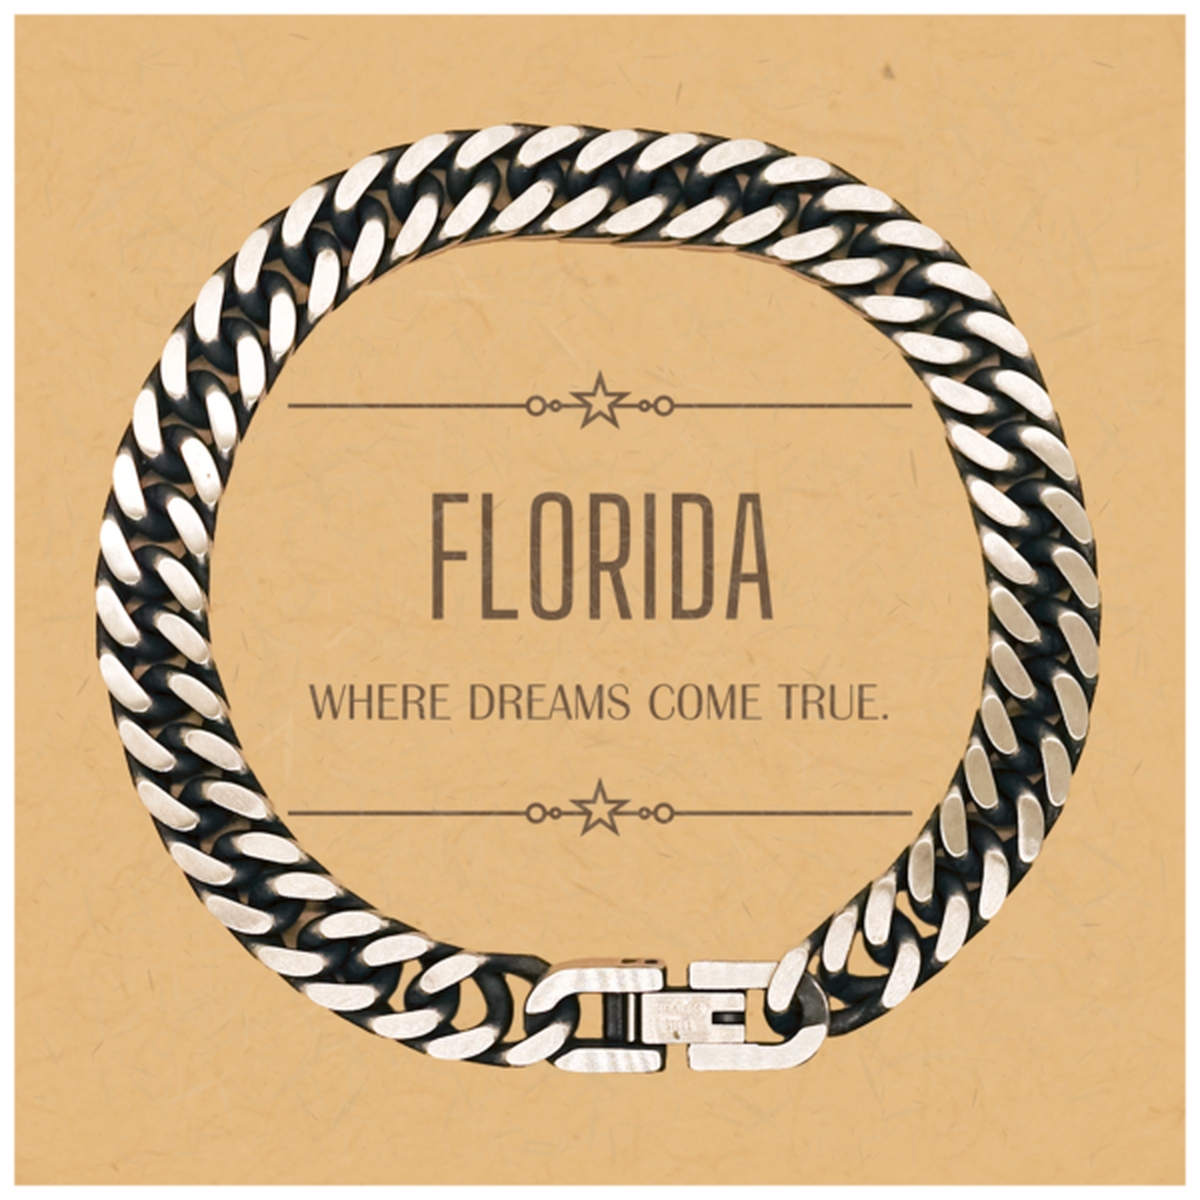 Love Florida State Cuban Link Chain Bracelet, Florida Where dreams come true, Birthday Christmas Inspirational Gifts For Florida Men, Women, Friends